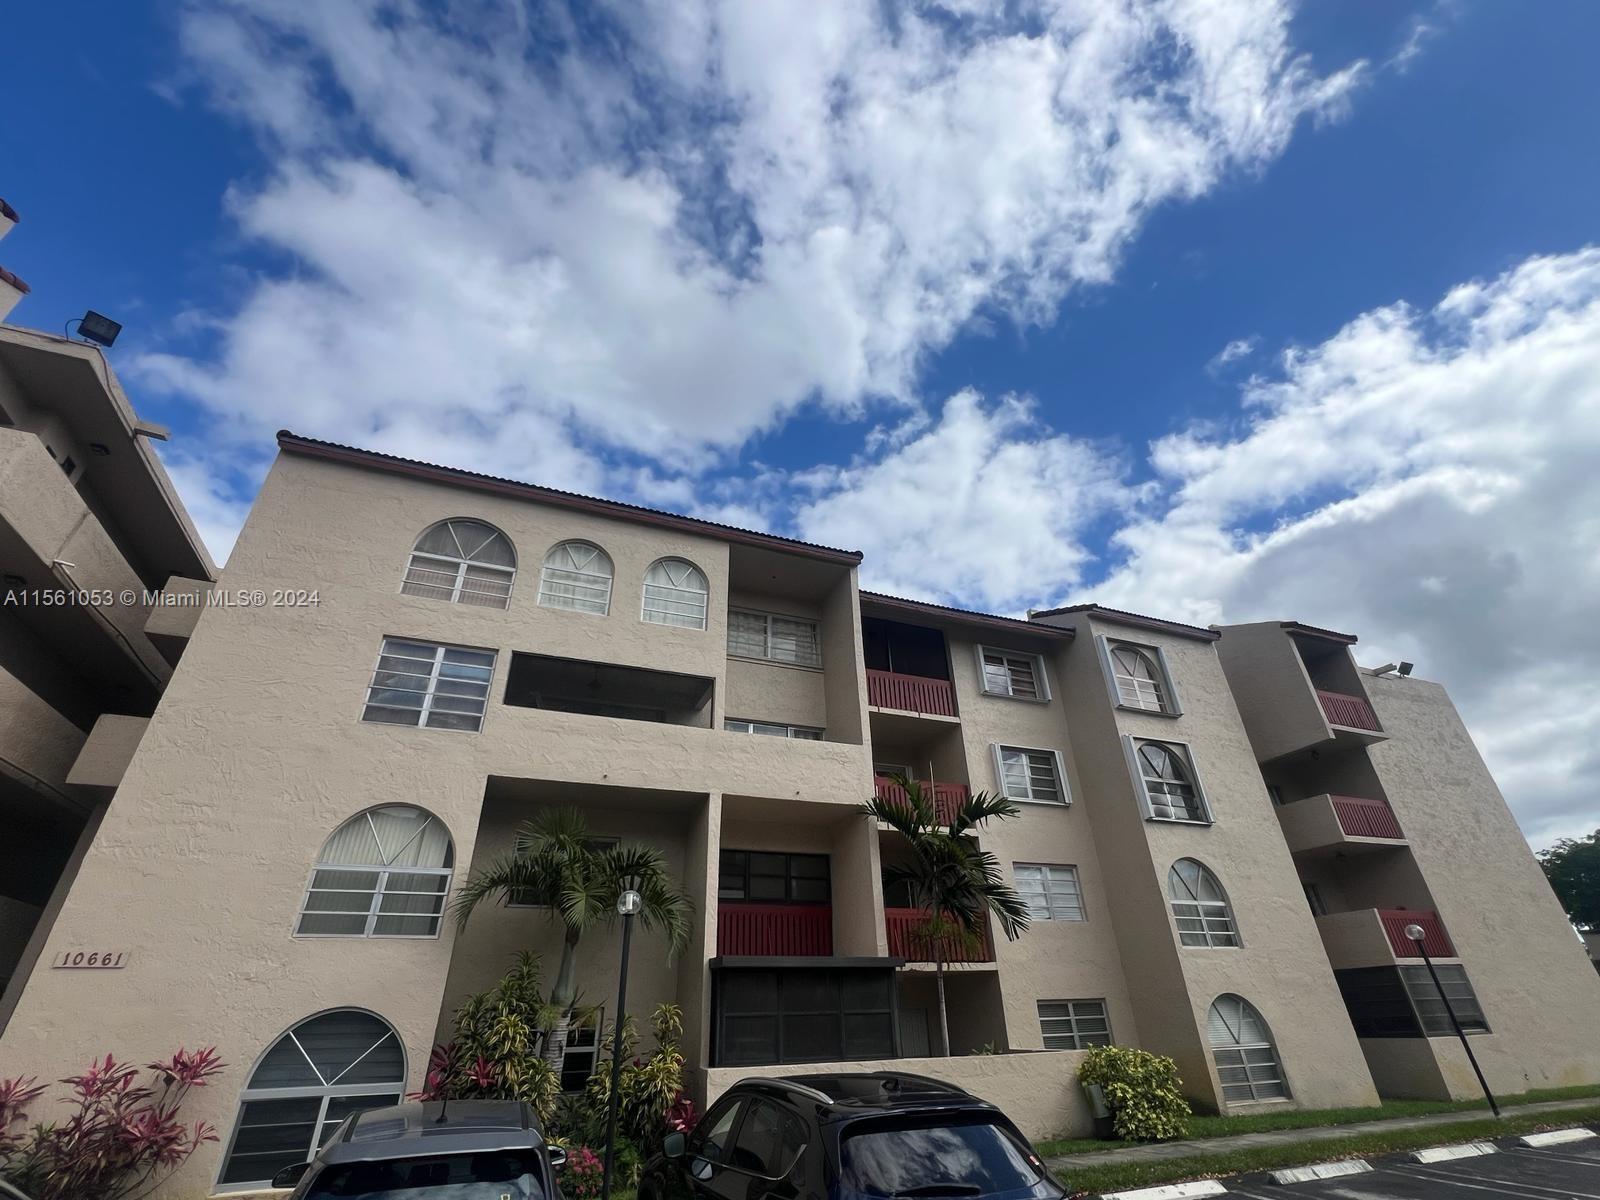 Property for Sale at 10661 Sw 108th Ave 3I, Miami, Broward County, Florida - Bedrooms: 1 
Bathrooms: 2  - $235,000